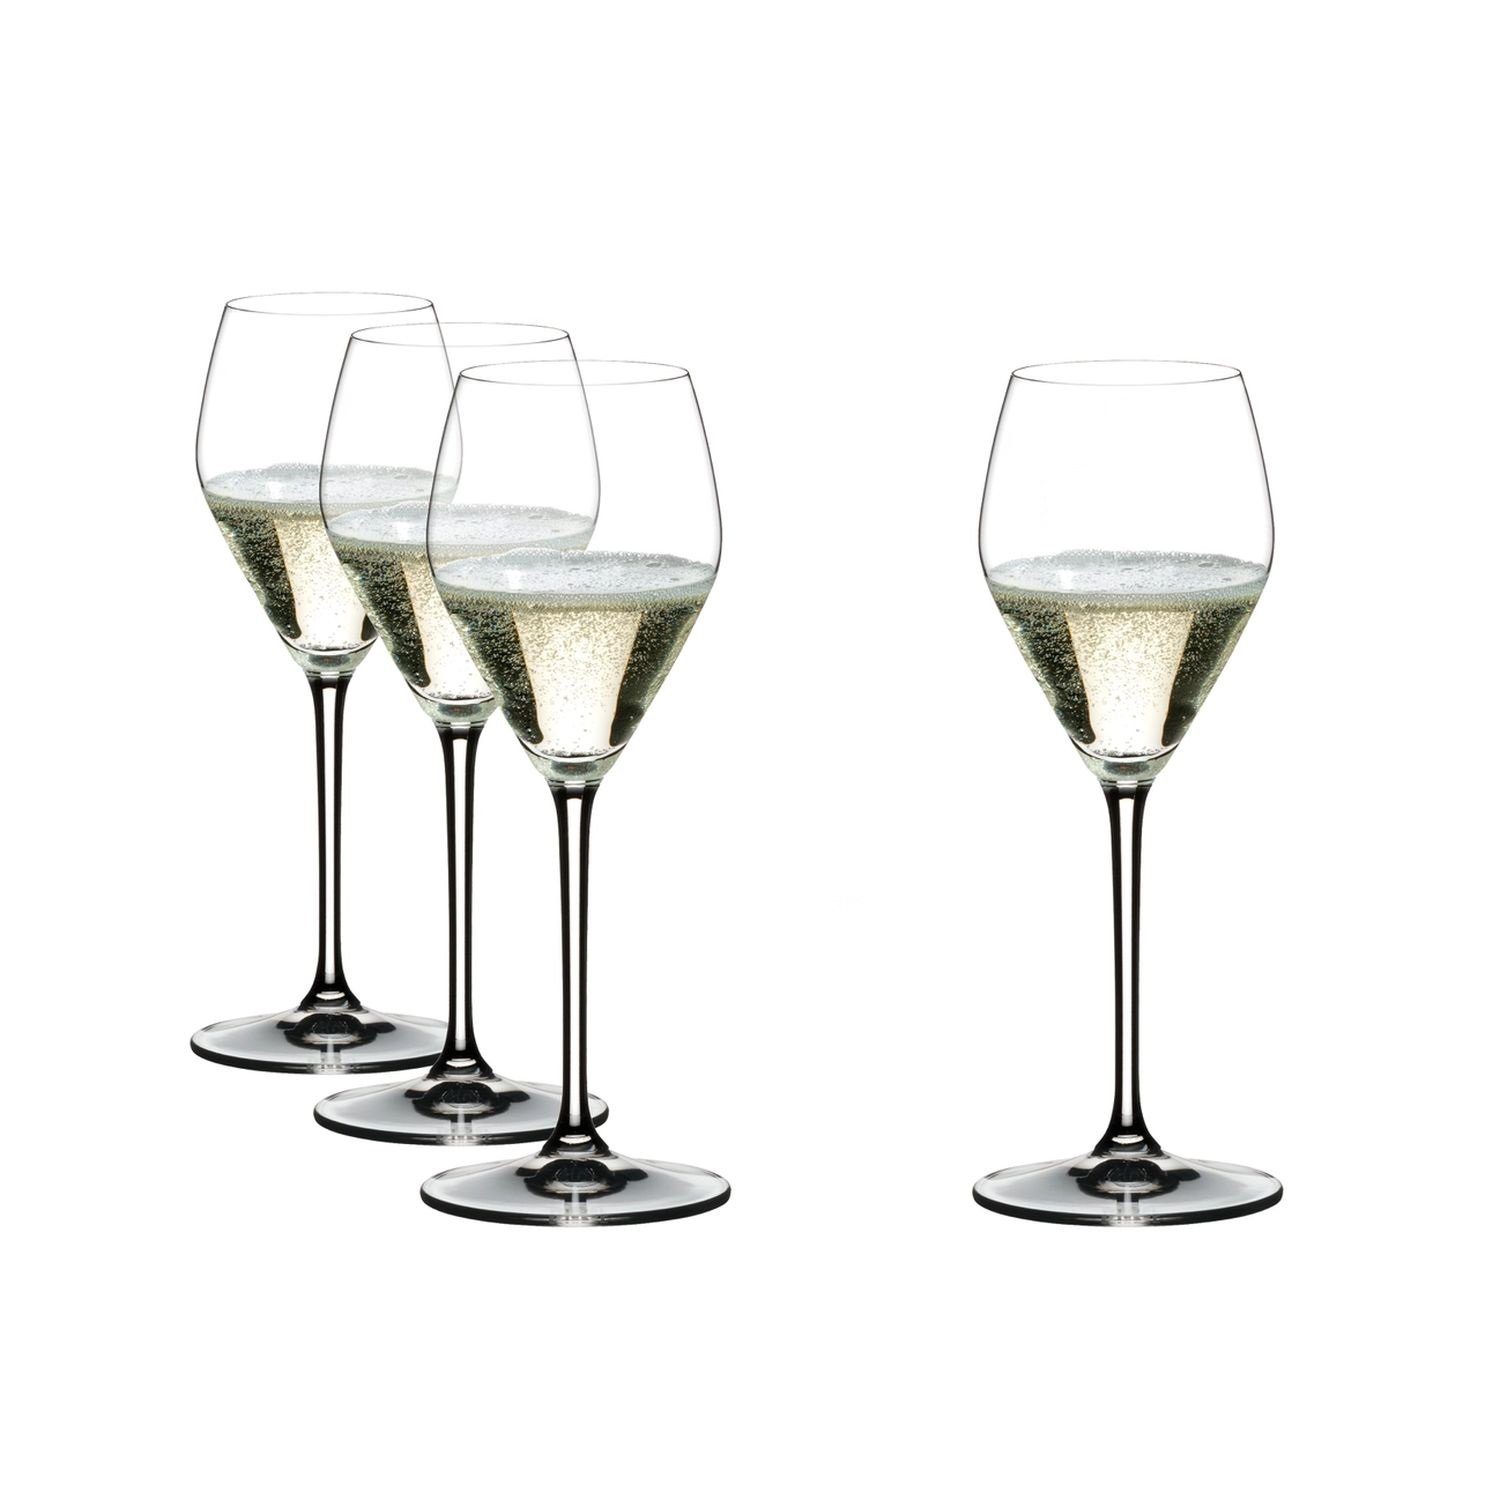 RIEDEL THE WINE GLASS COMPANY Weinglas Heart To Heart Champagner 4er Set, Kristallglas